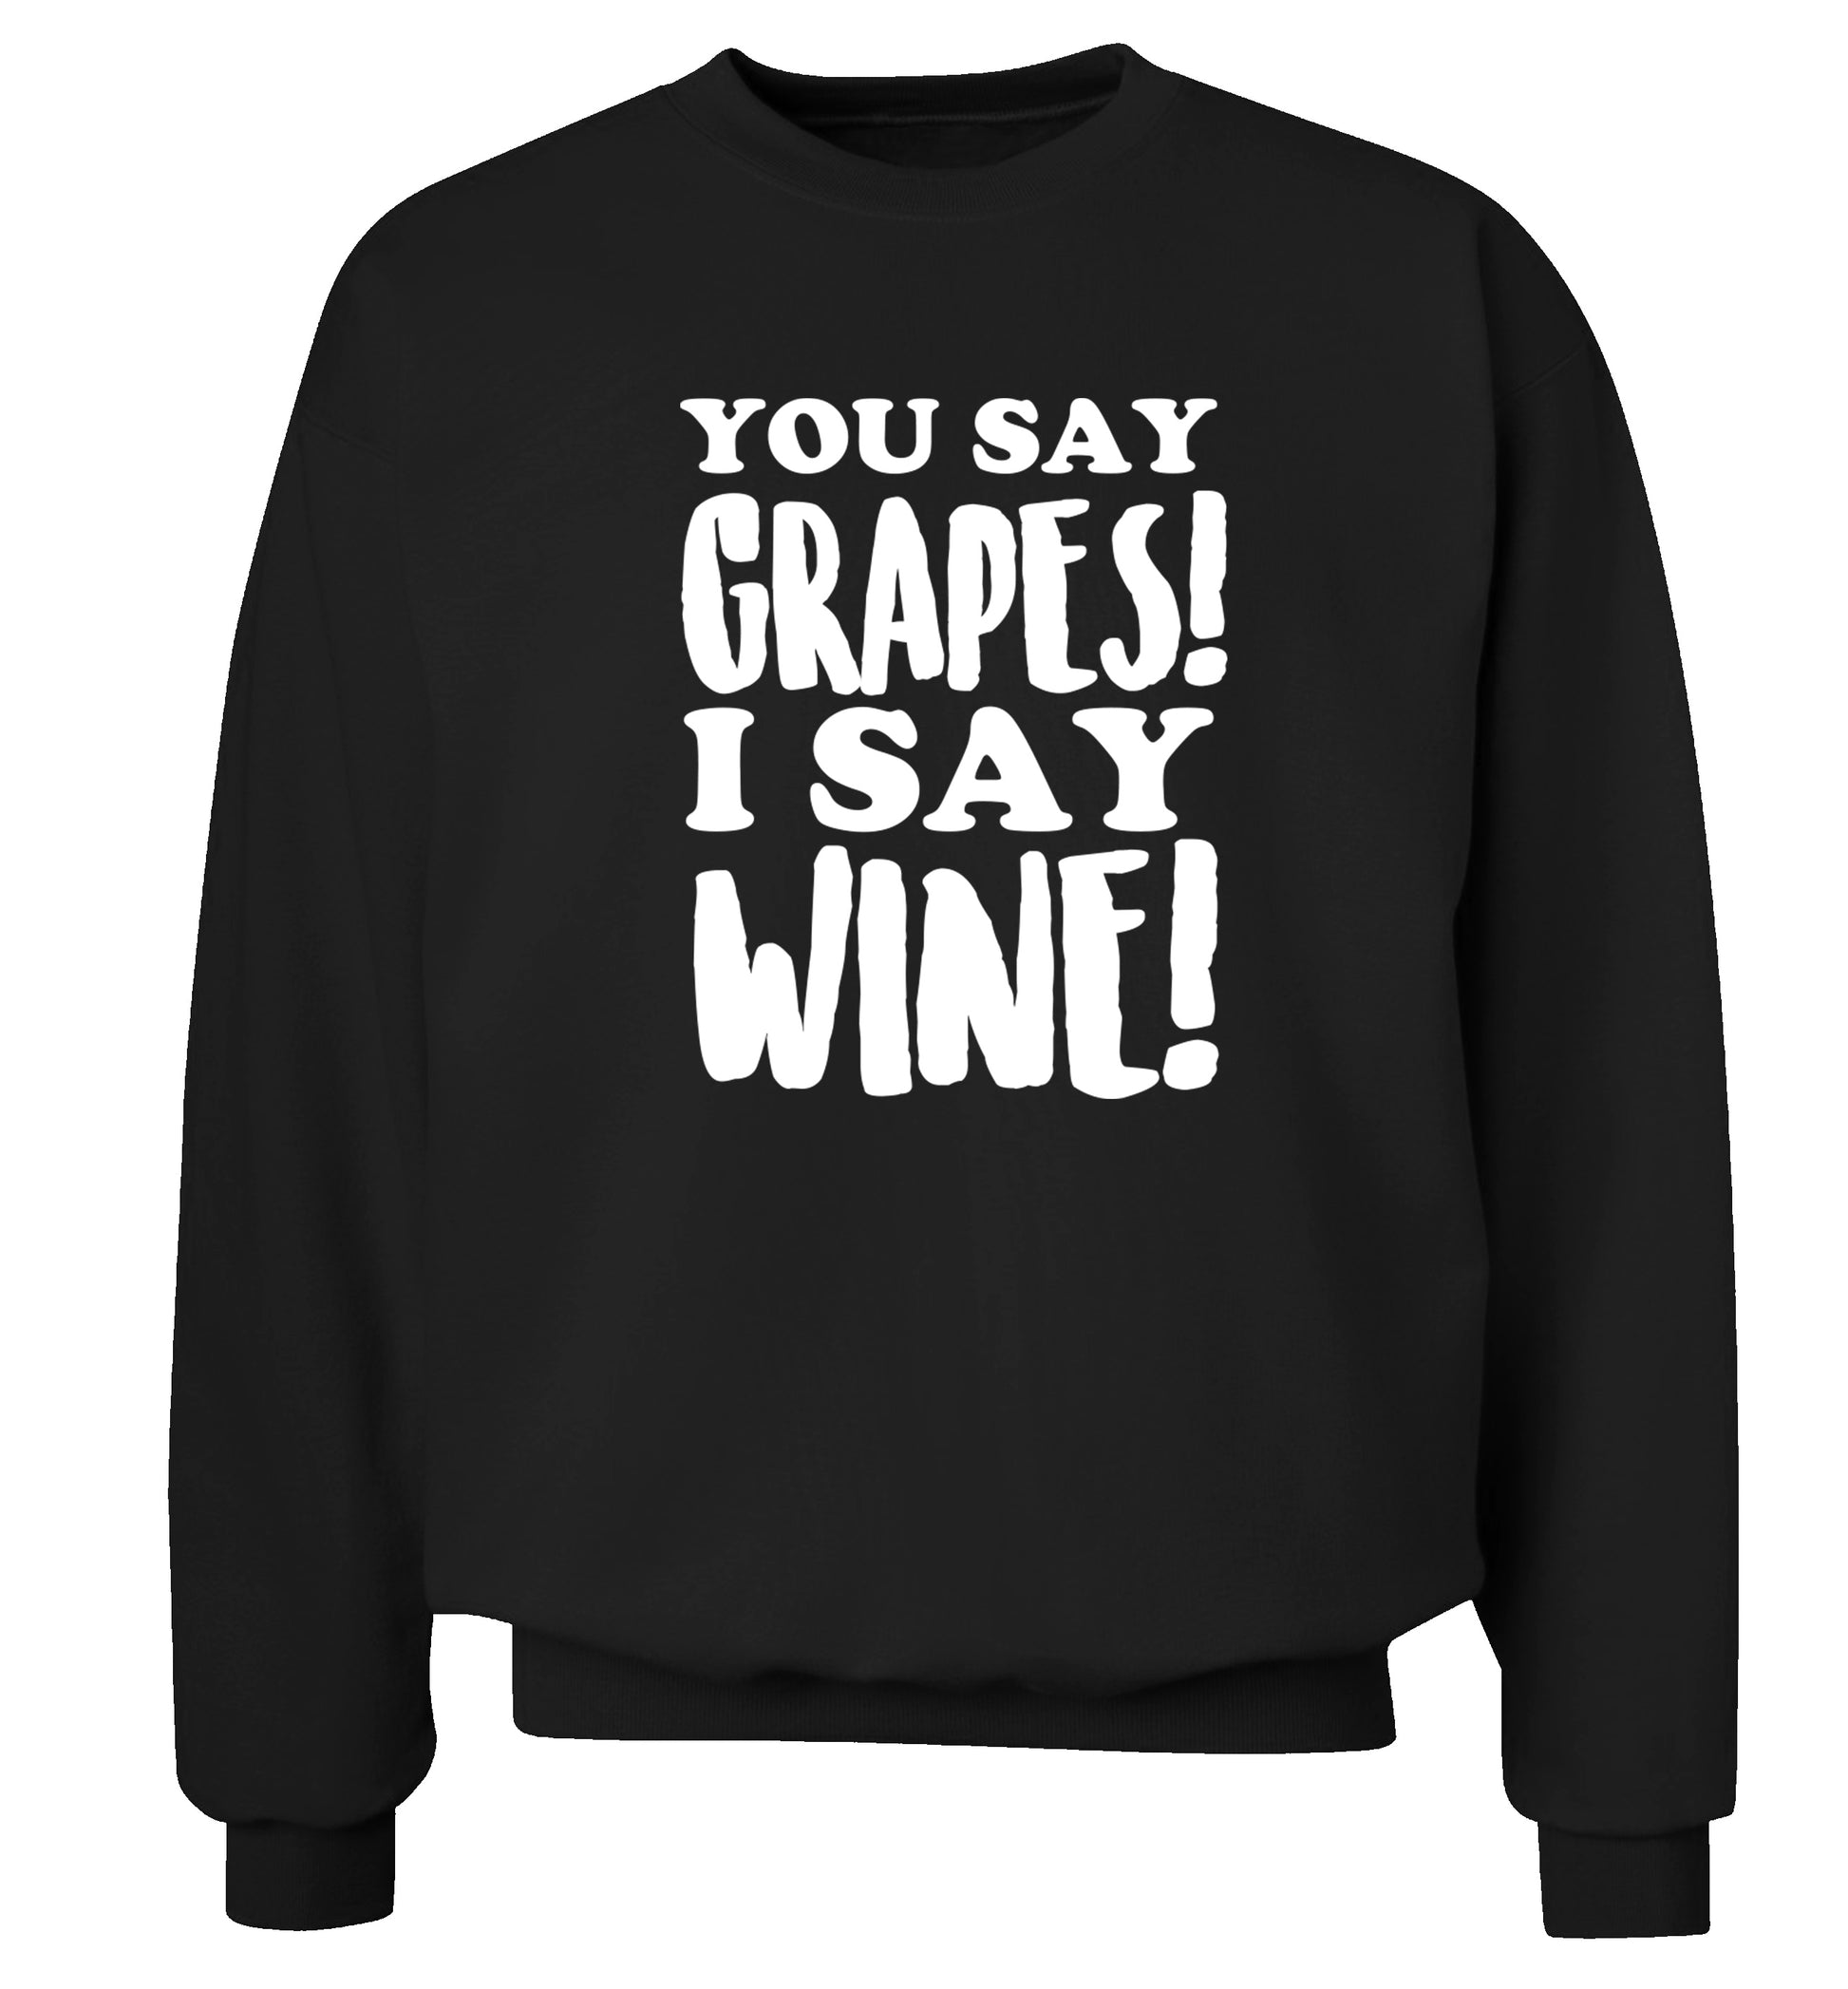 You say grapes I say wine! Adult's unisex black Sweater 2XL